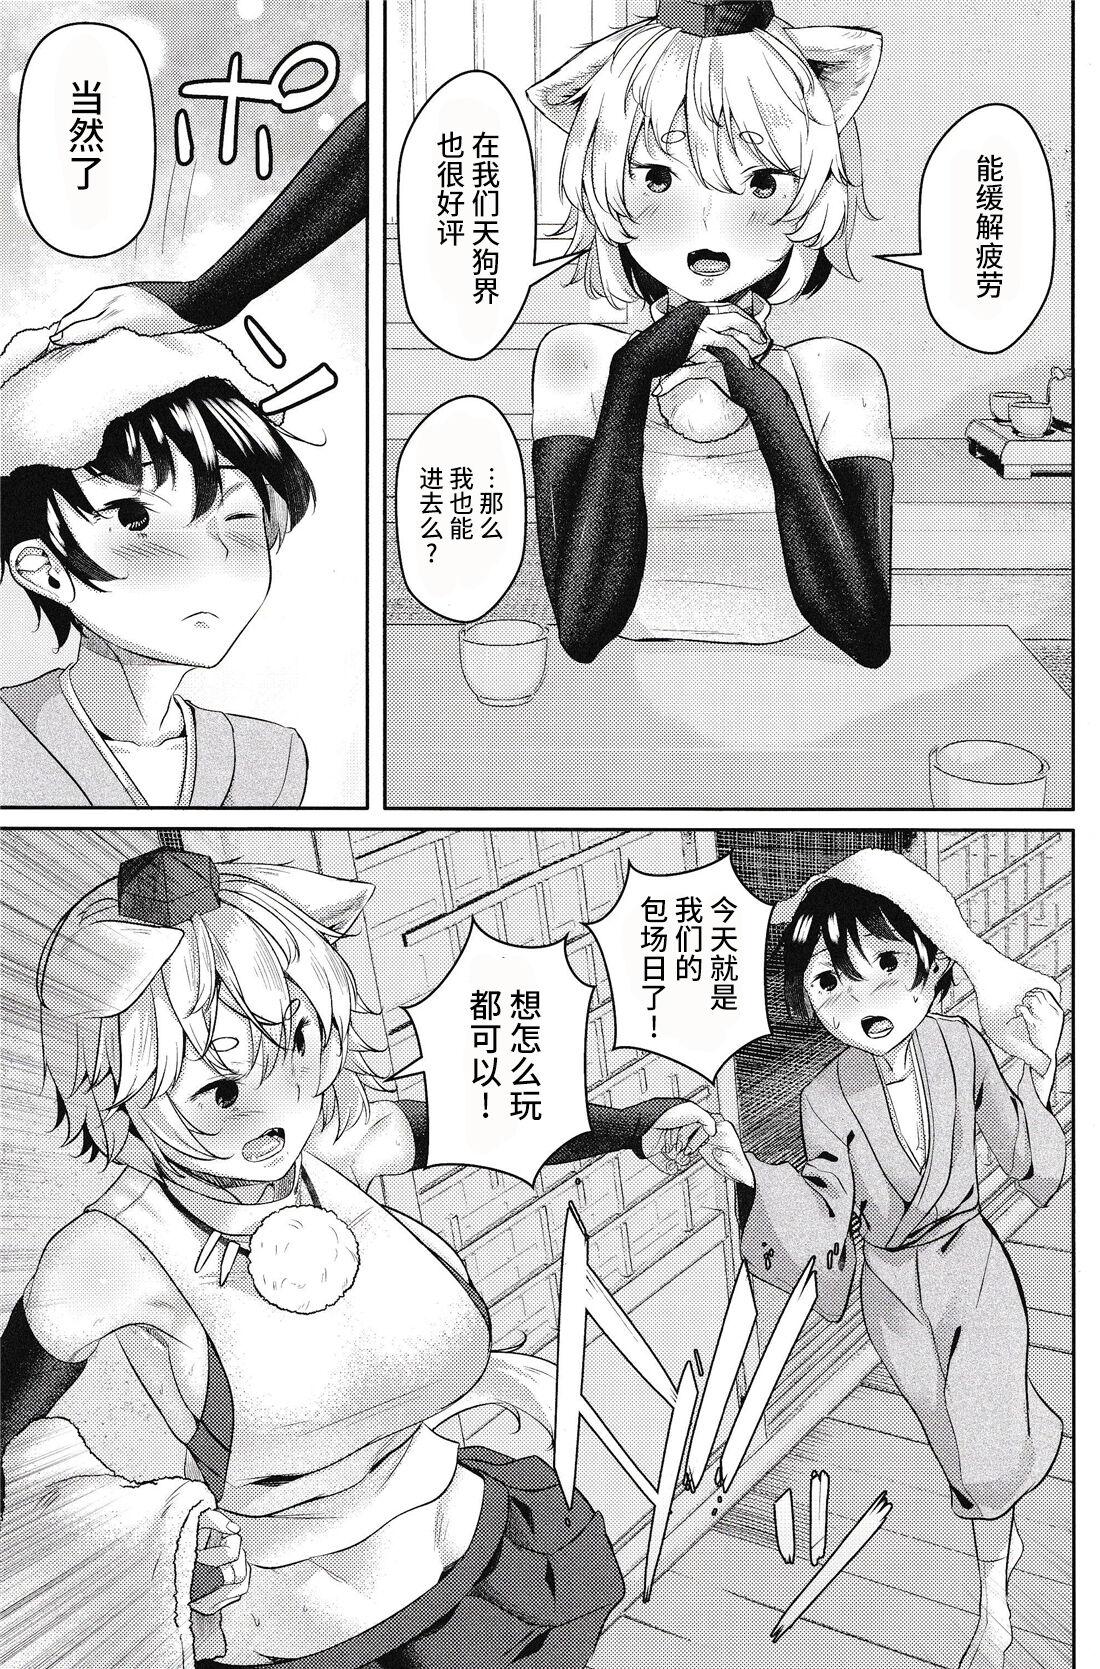 Friend 犬のお姉ちゃんと温泉旅行 - Touhou project Young Petite Porn - Page 5